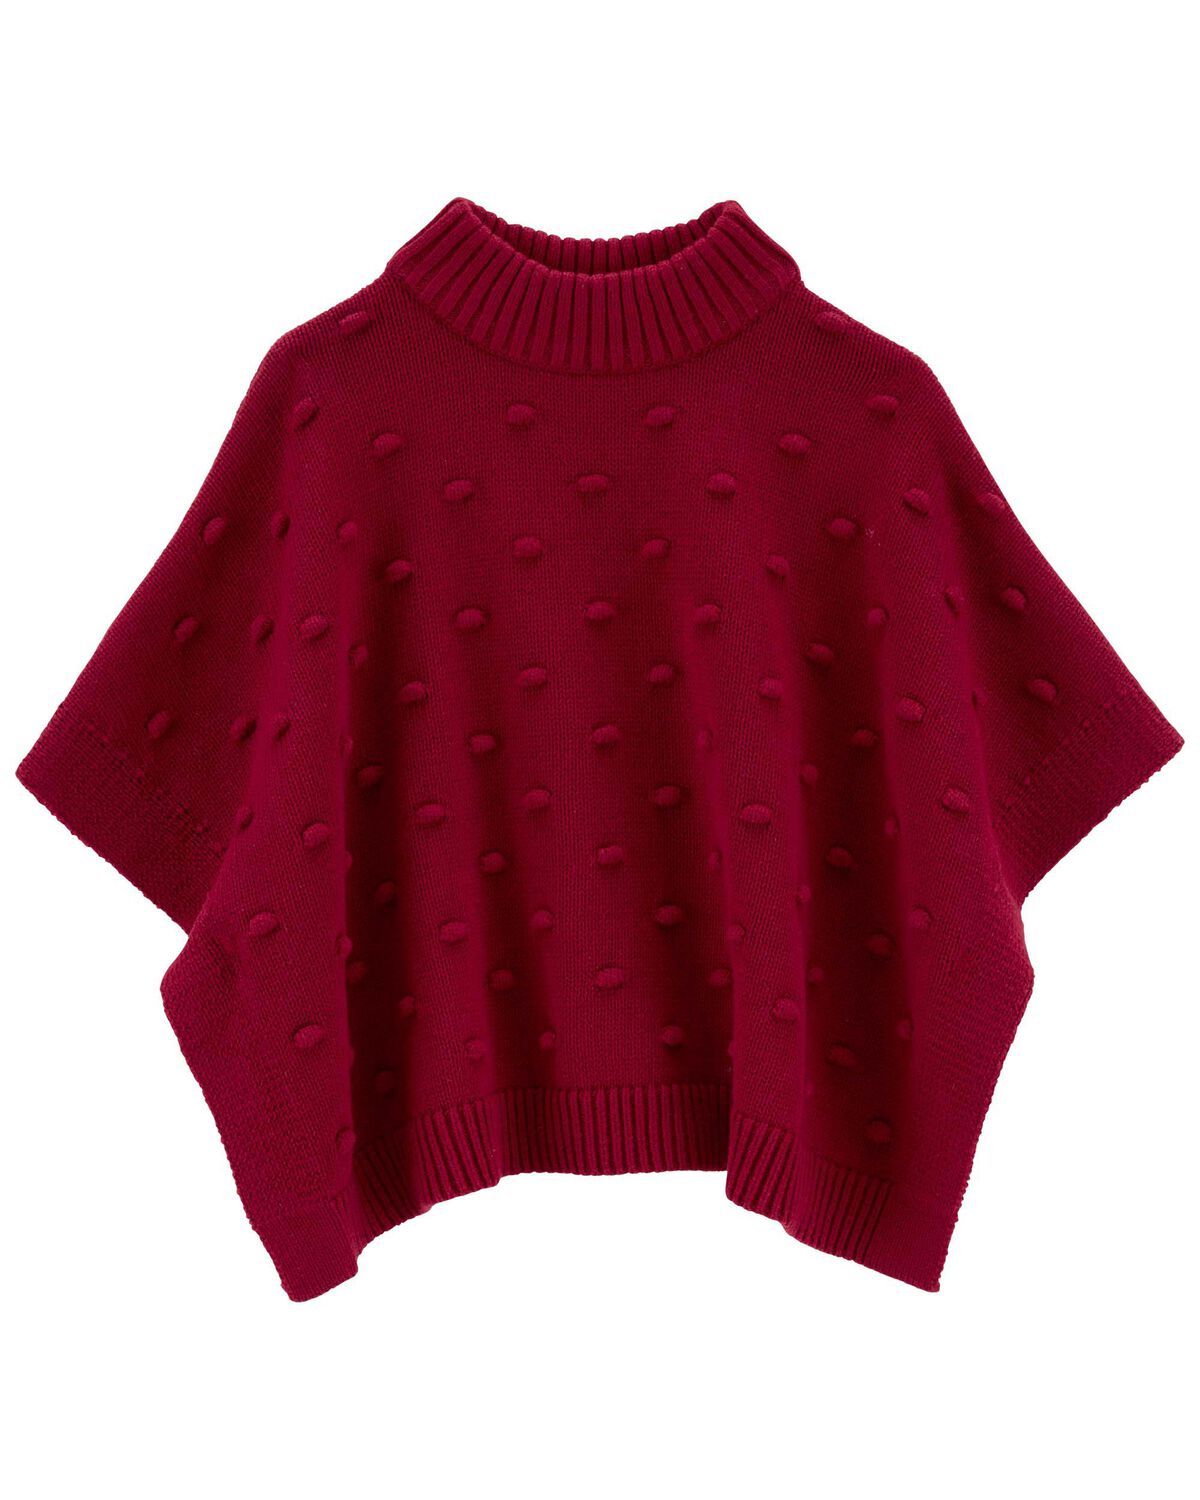 Red Toddler Bobble Poncho | carters.com | Carter's